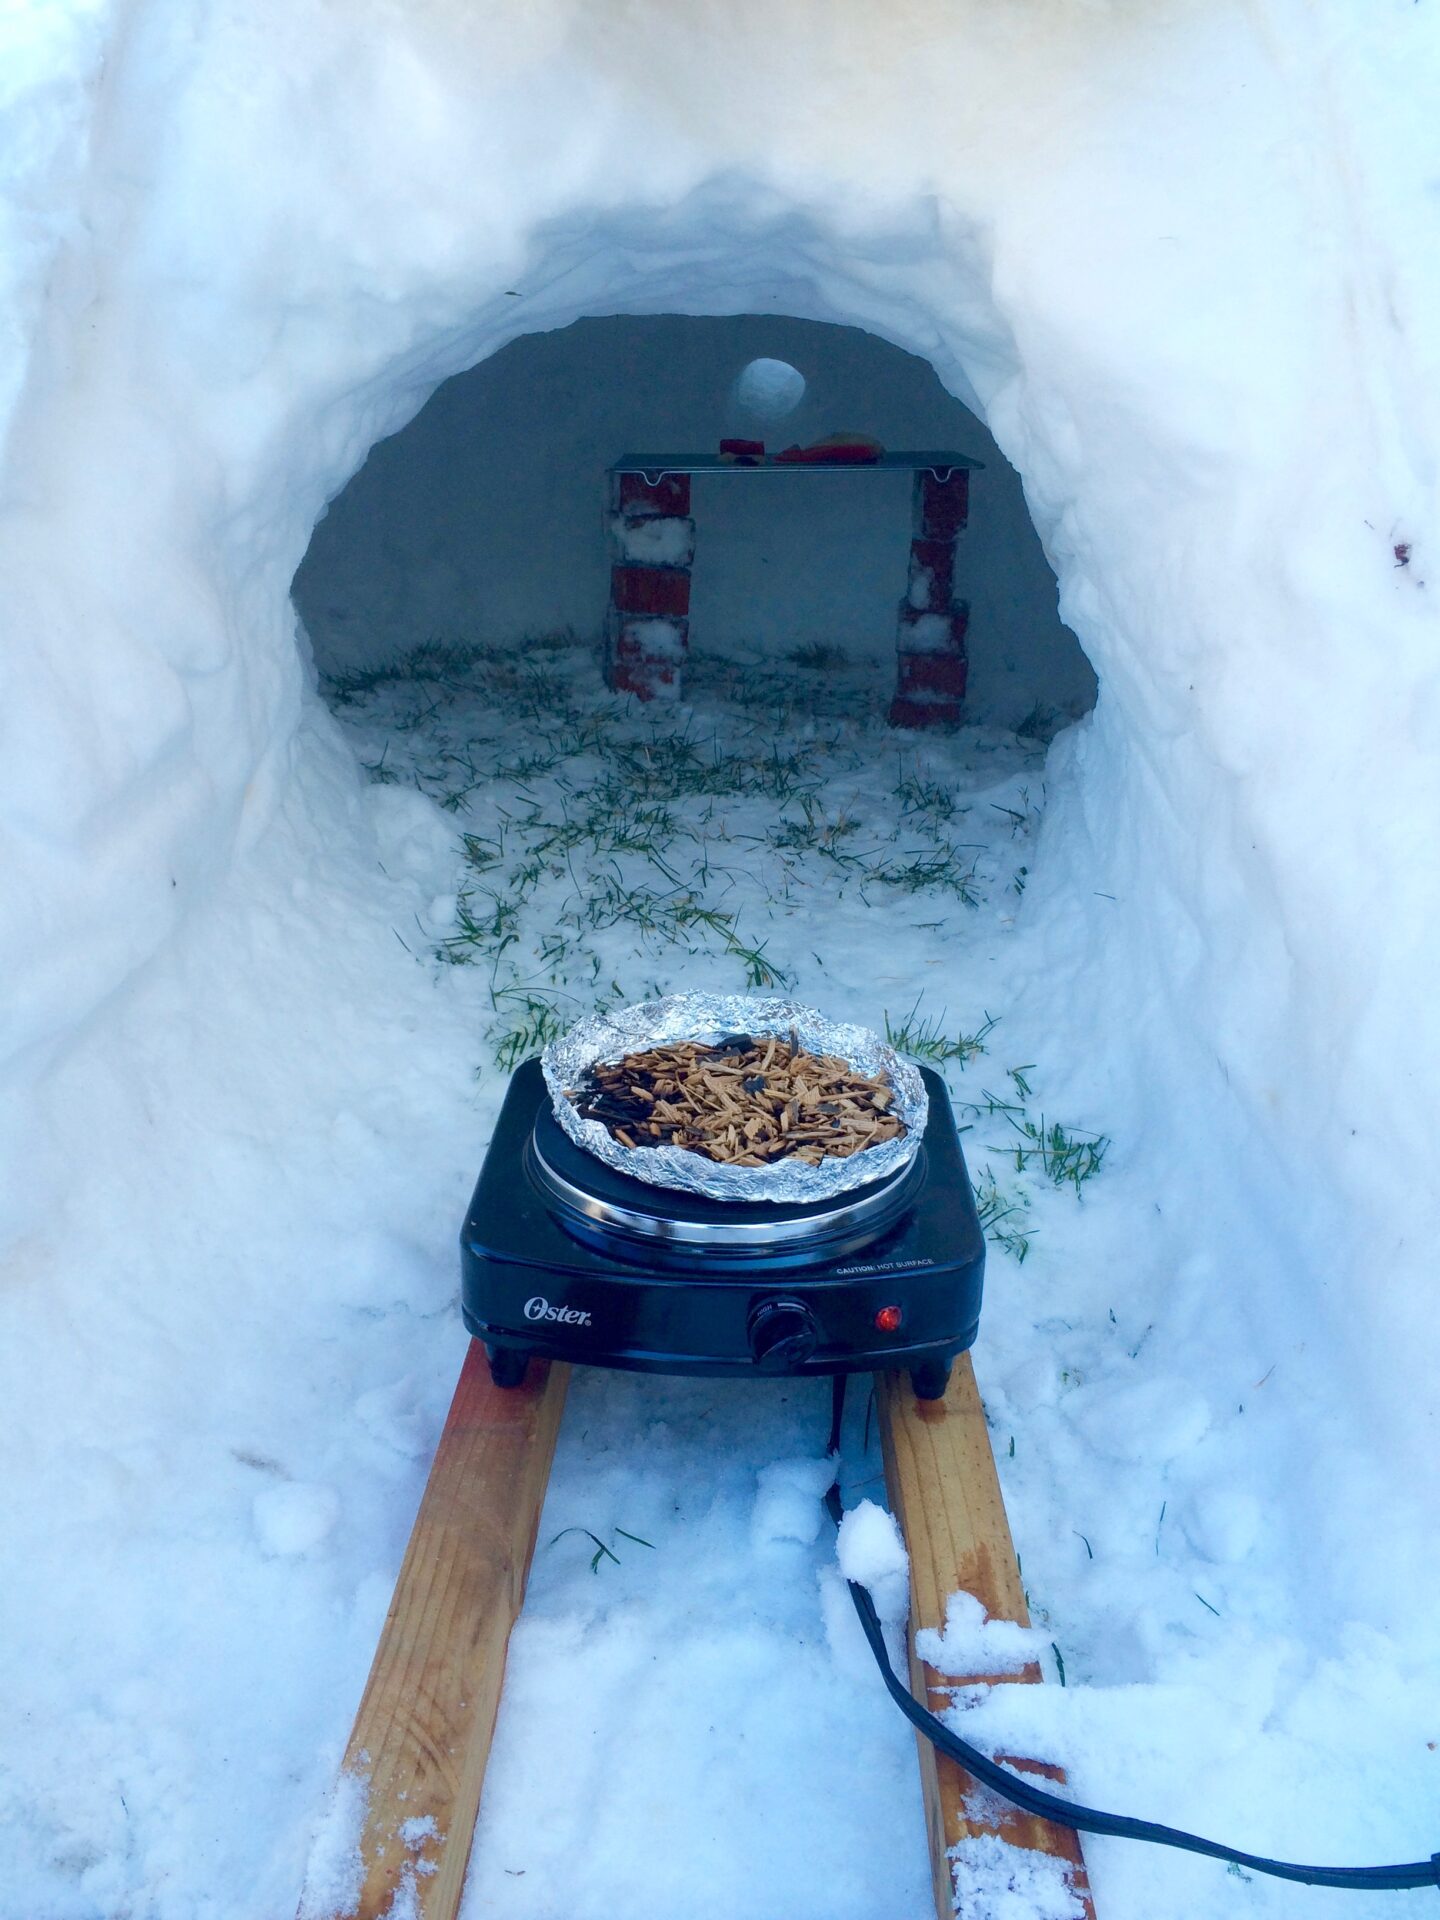 Diy Cold Smoking In An Igloo Snow Cave Cake Websites More Llc